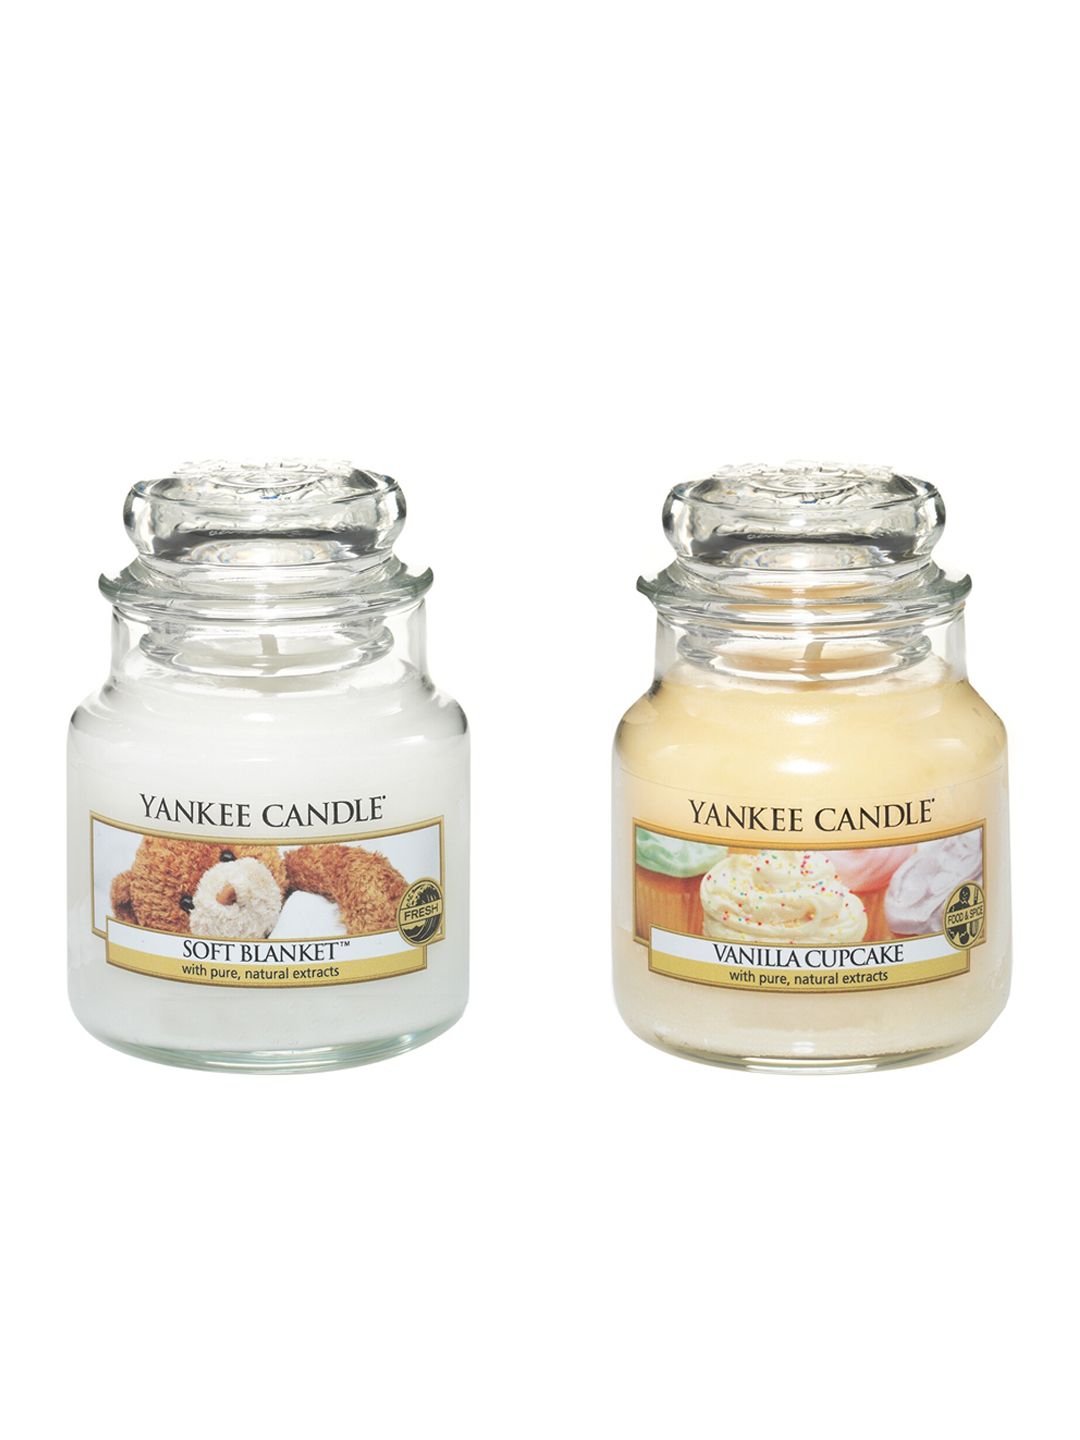 YANKEE CANDLE Set Of 2 Soft Blanket & Vanilla Cupcake Scented Jar Candles Price in India